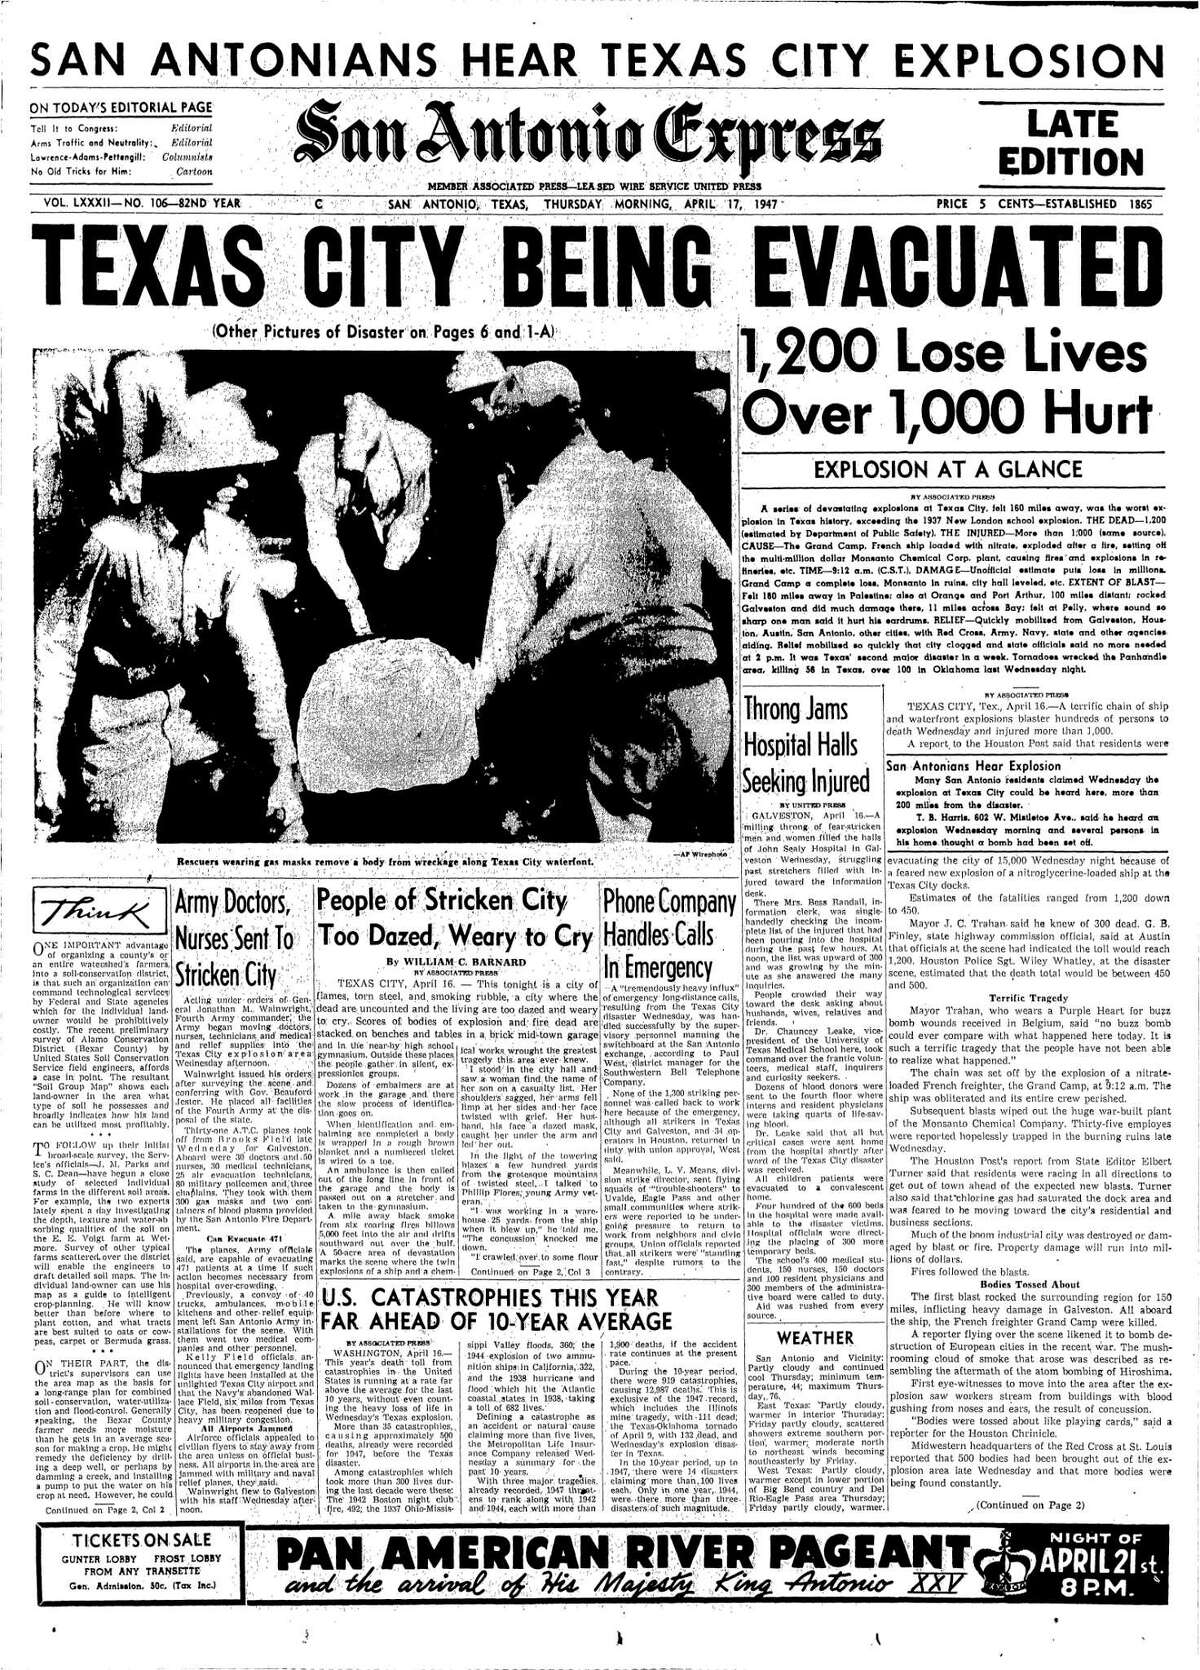 A1 of San Antonio Express, April 17, 1947. "Texas City being evacuated." The Grandcamp, a ship docked in Texas City, explodes when a fire in the cargo hold reaches ammonium nitrate fertilizer. The resulting explosion leveled buildings in the area and shattered windows in Houston, forty miles away. According to the front page, San Antonians could hear the explosion. An estimated 500 to 600 people were killed with more than three thousand injured.  From digitized microfilm